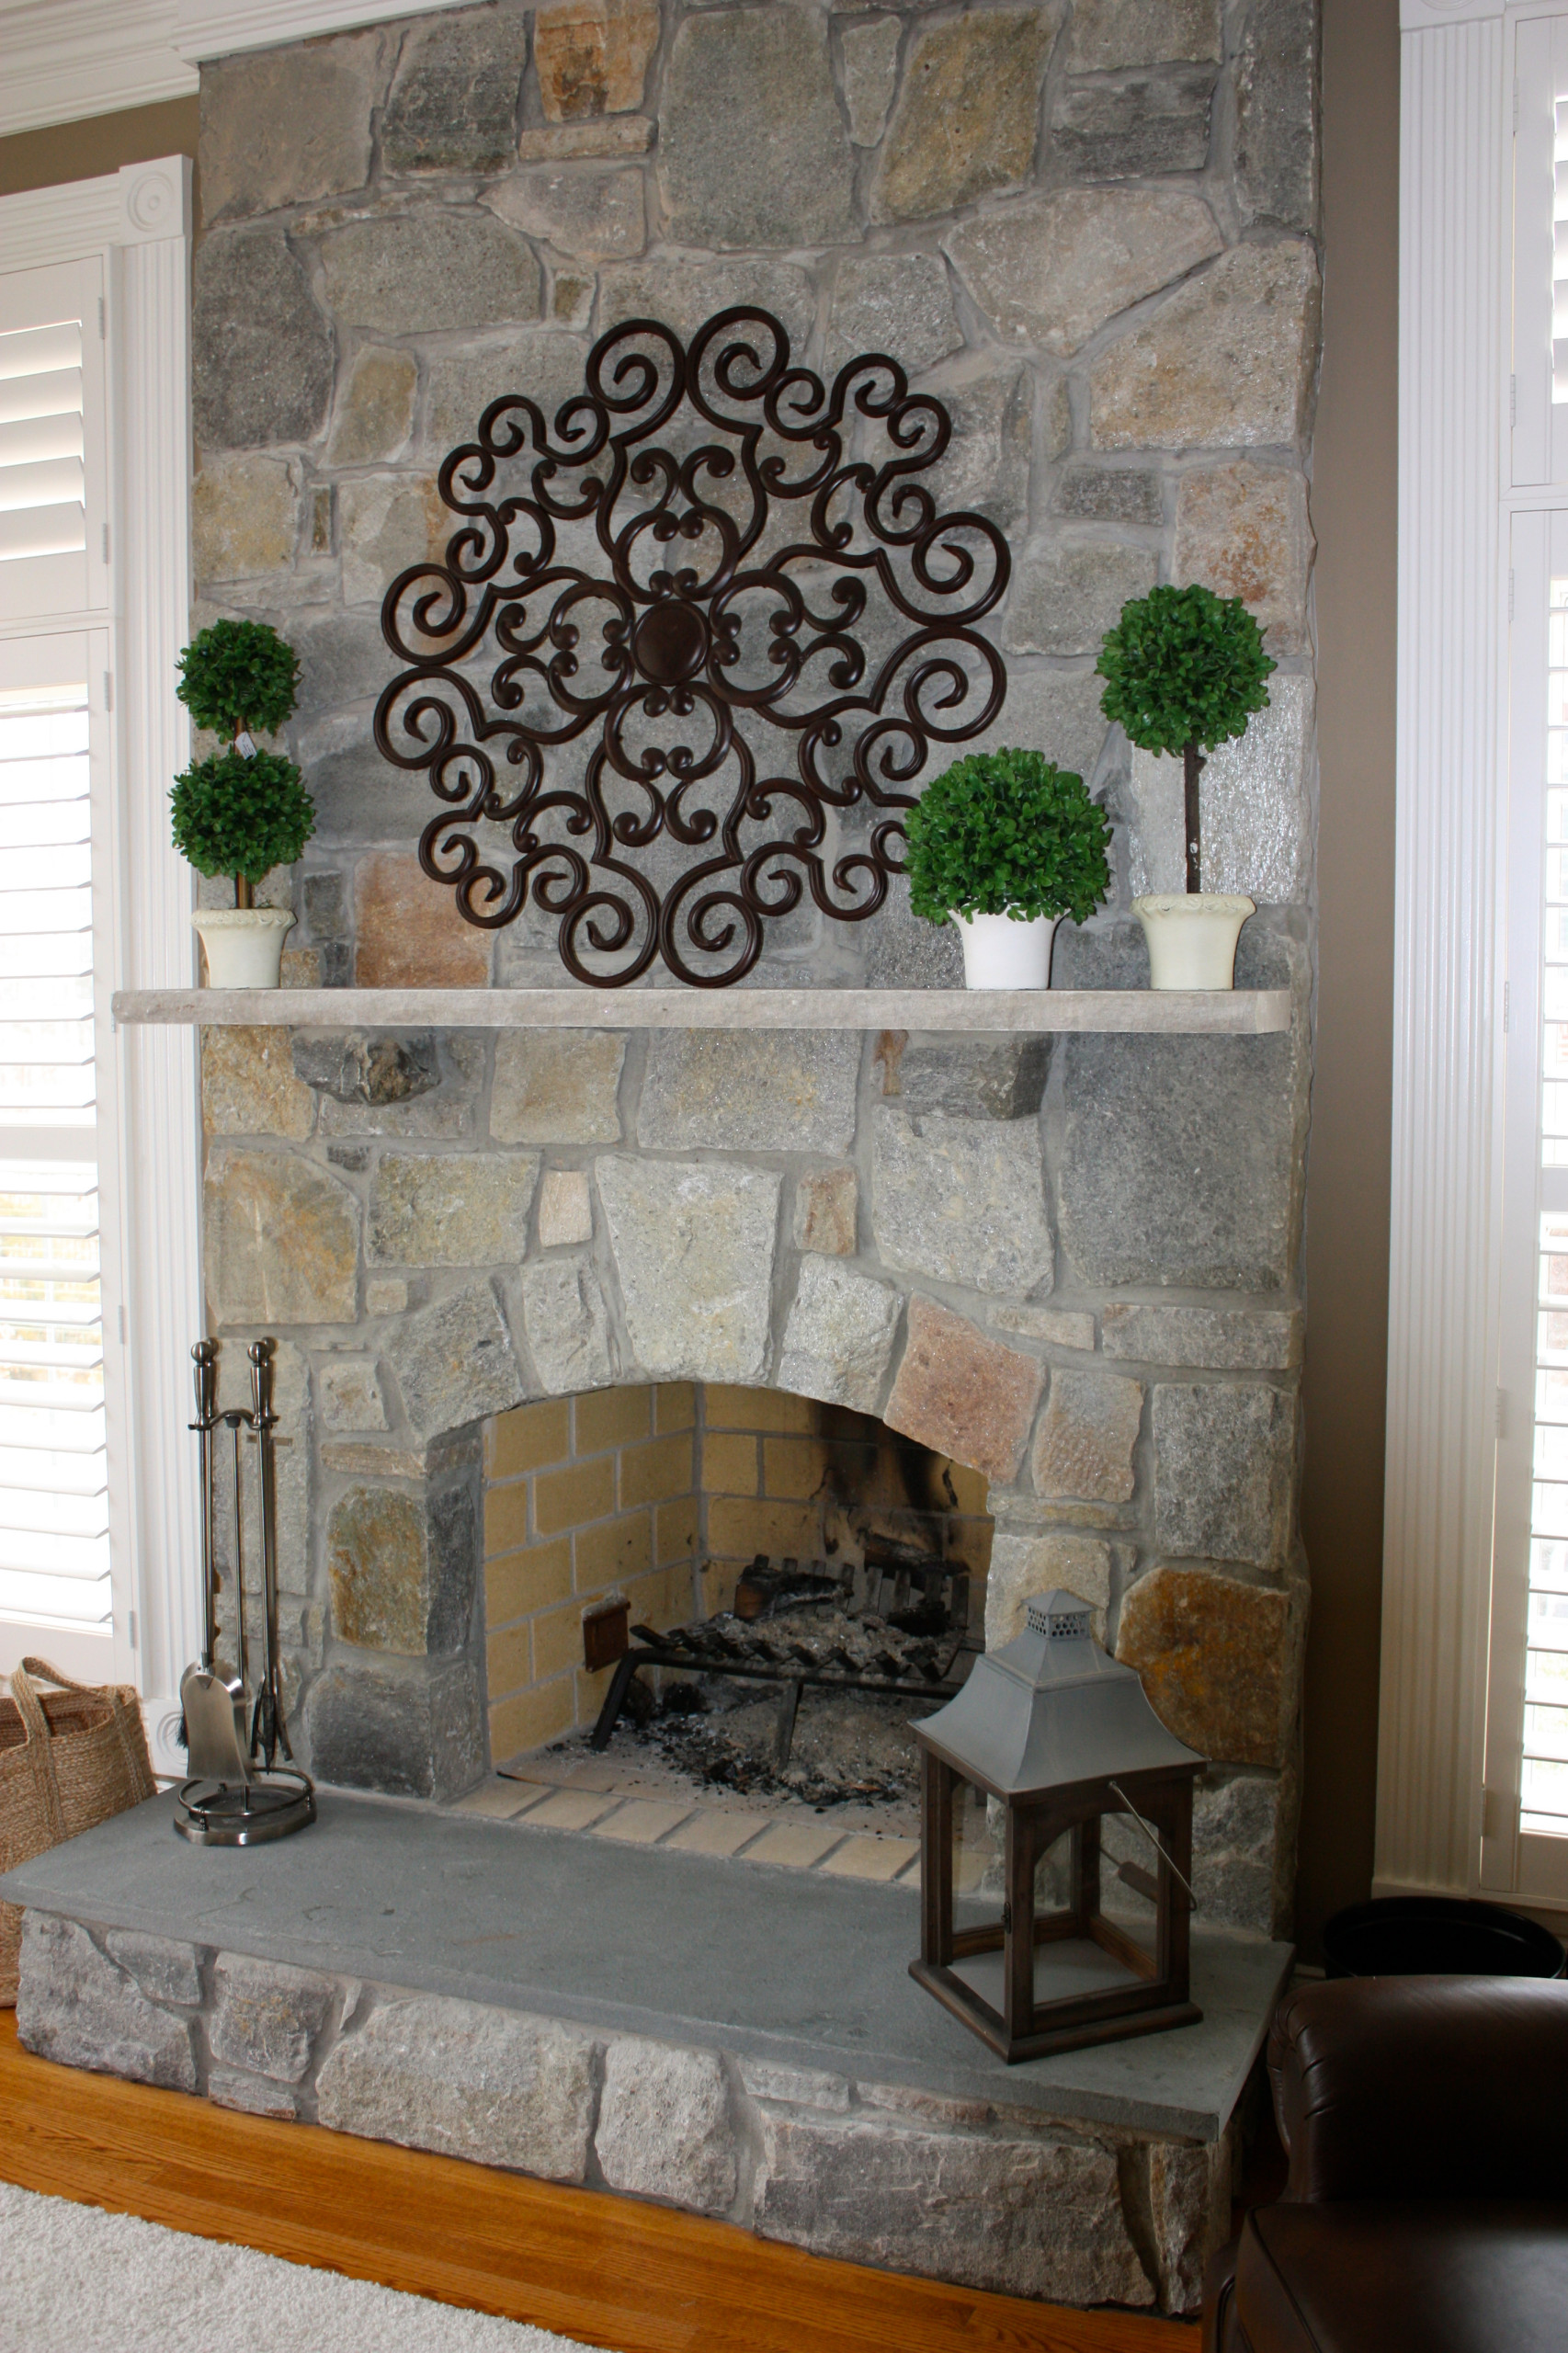 Adding Color and Texture to Liven Up the Family Room